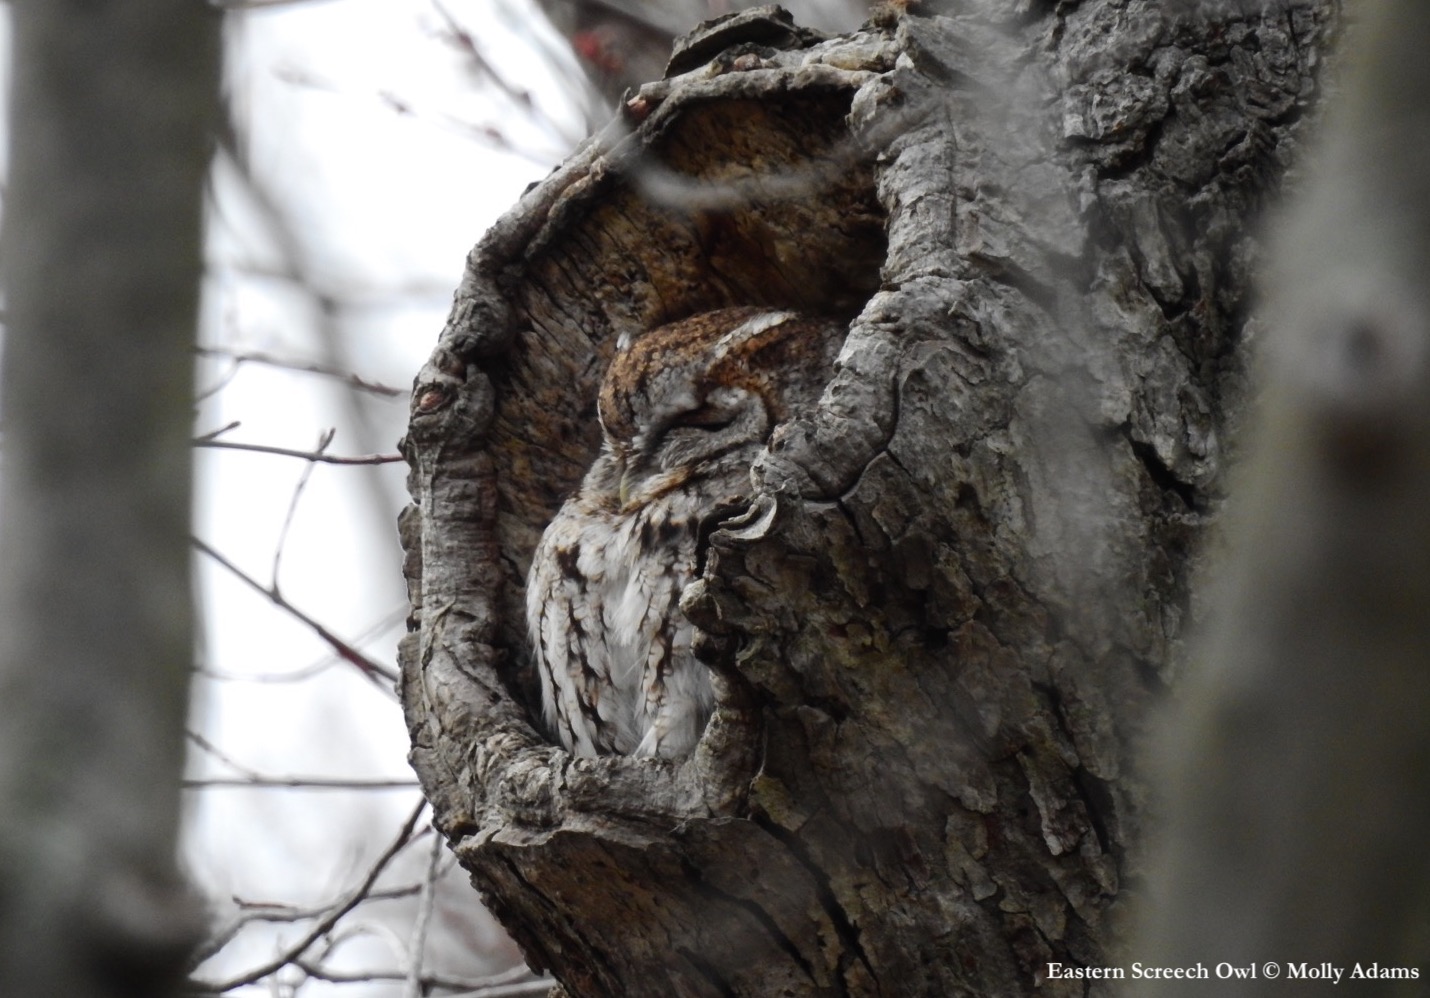 Photograph of an Eastern Screech Owl with its eyes closed in nest cavity 